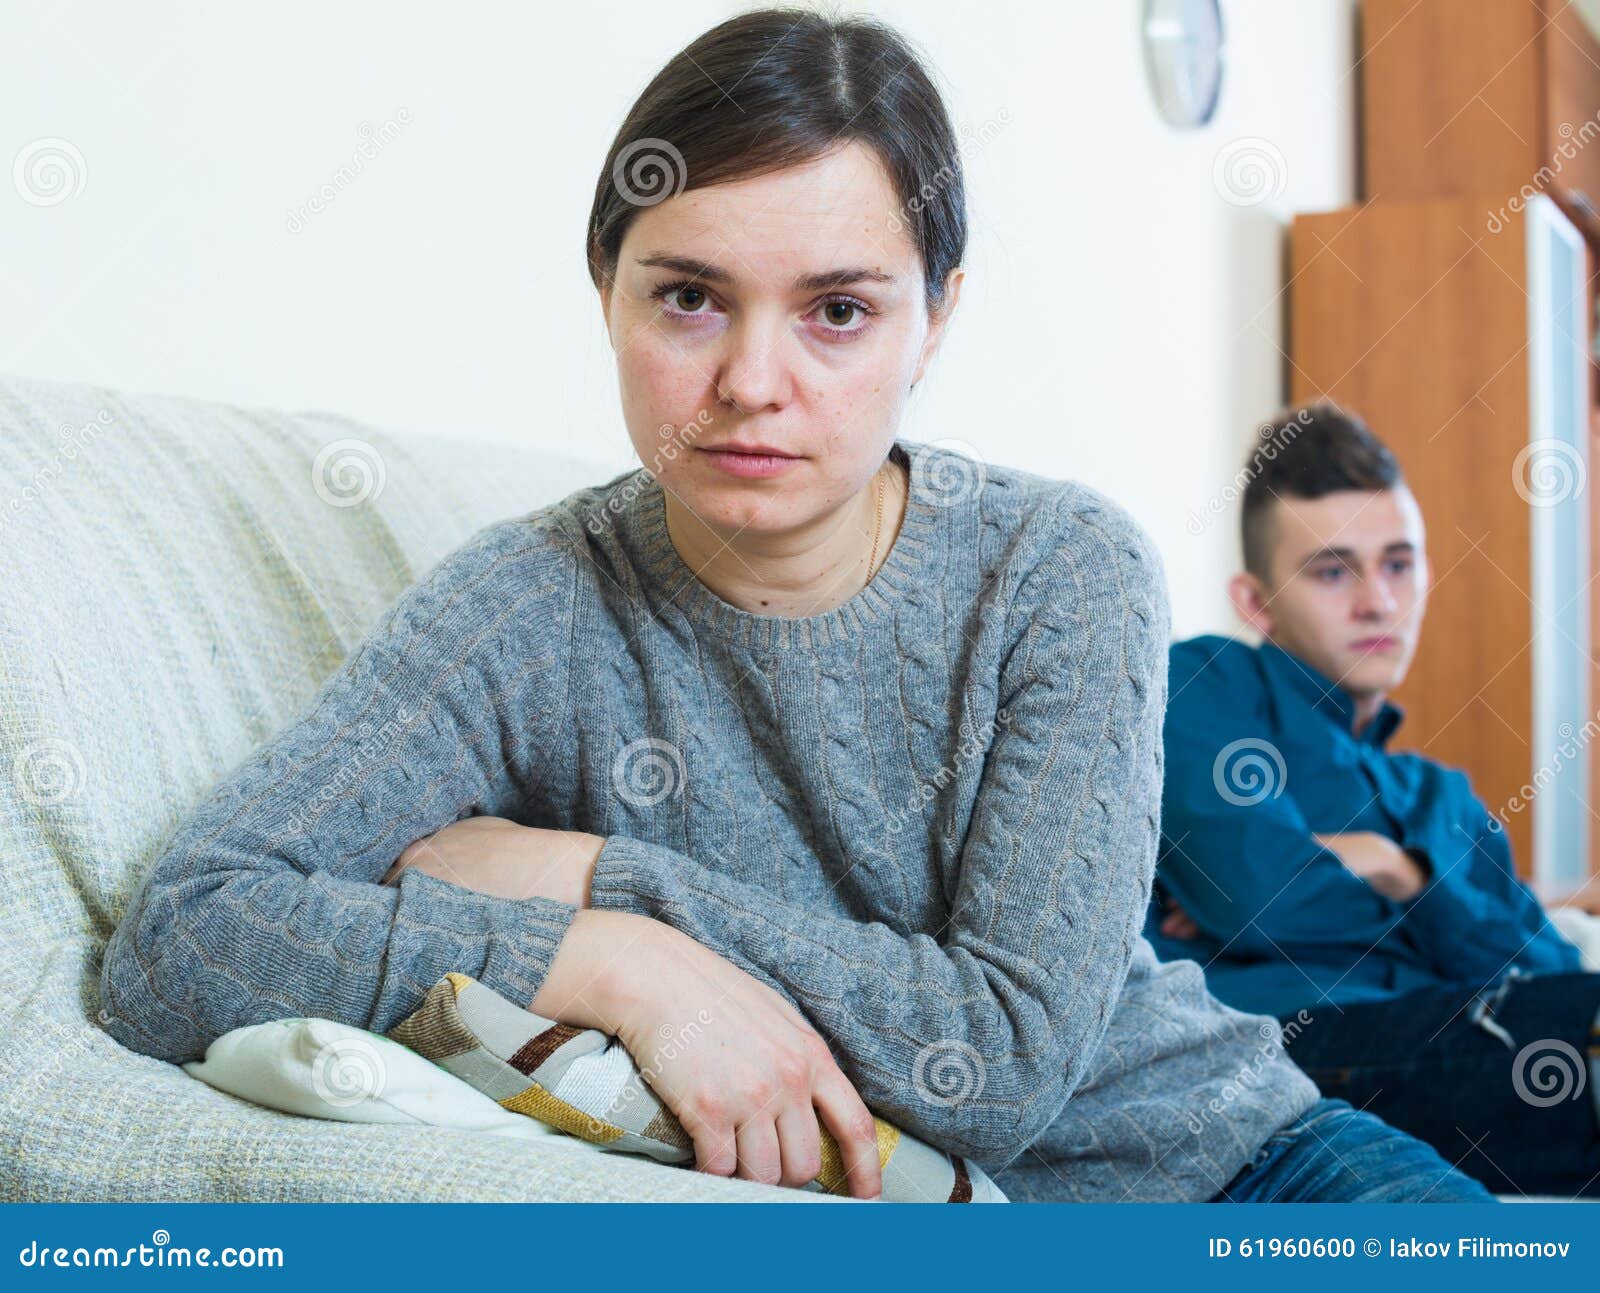 Mother And Teenager Son Having Fight At Home Stock Photo Image Of